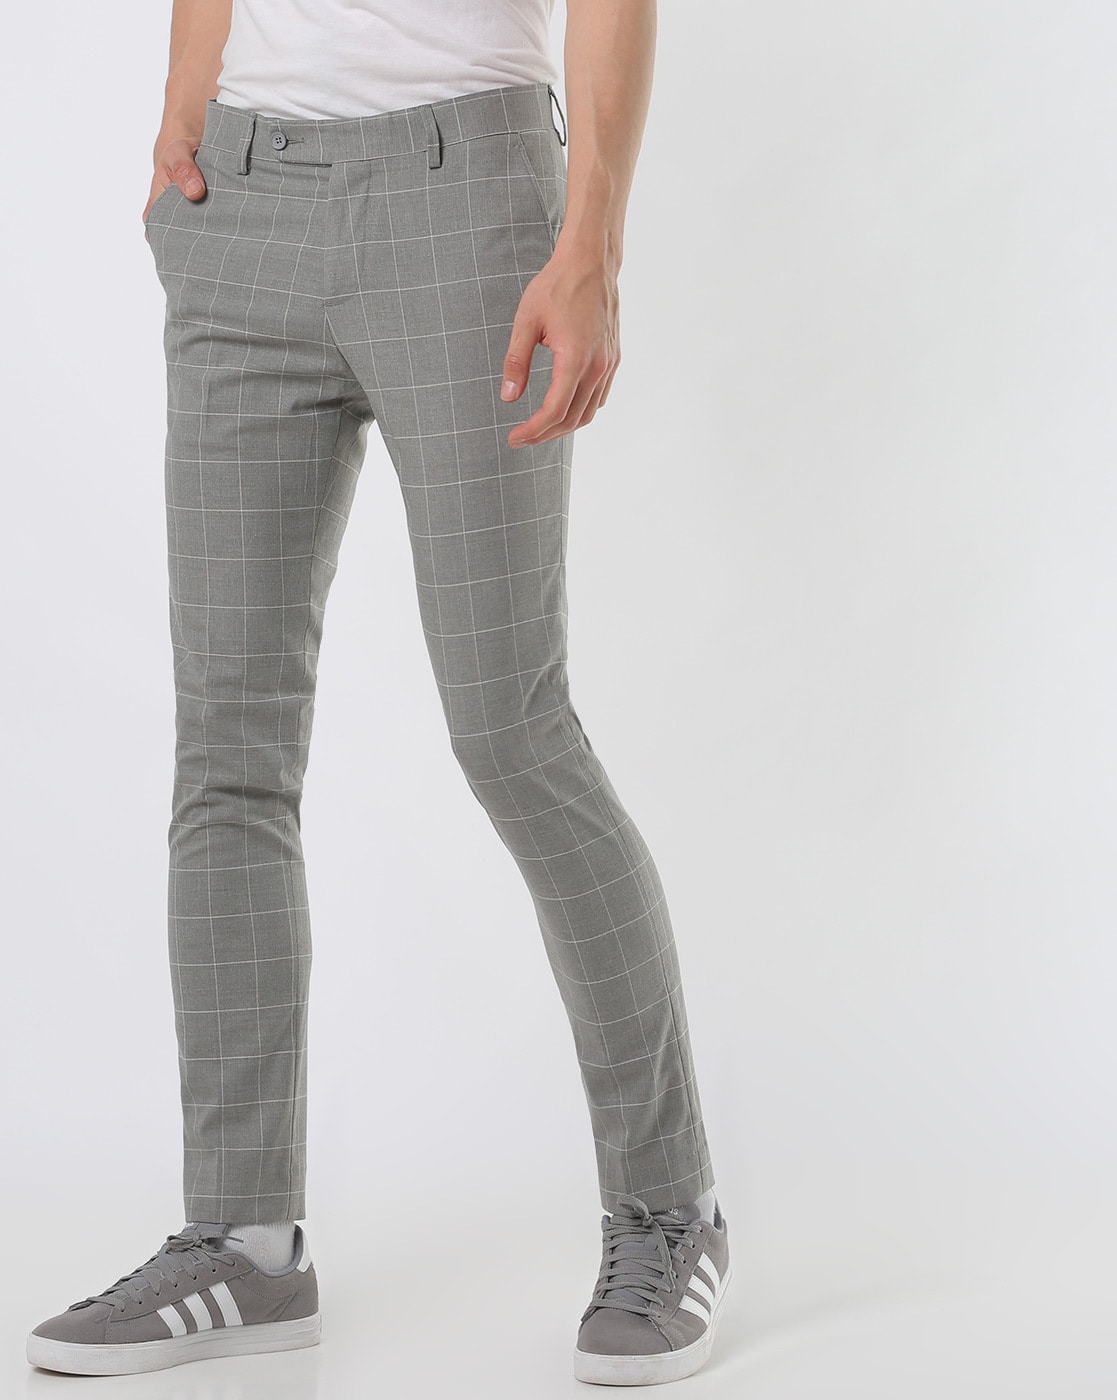 Suit trousers Skinny Fit - Black/Grey checked - Men | H&M